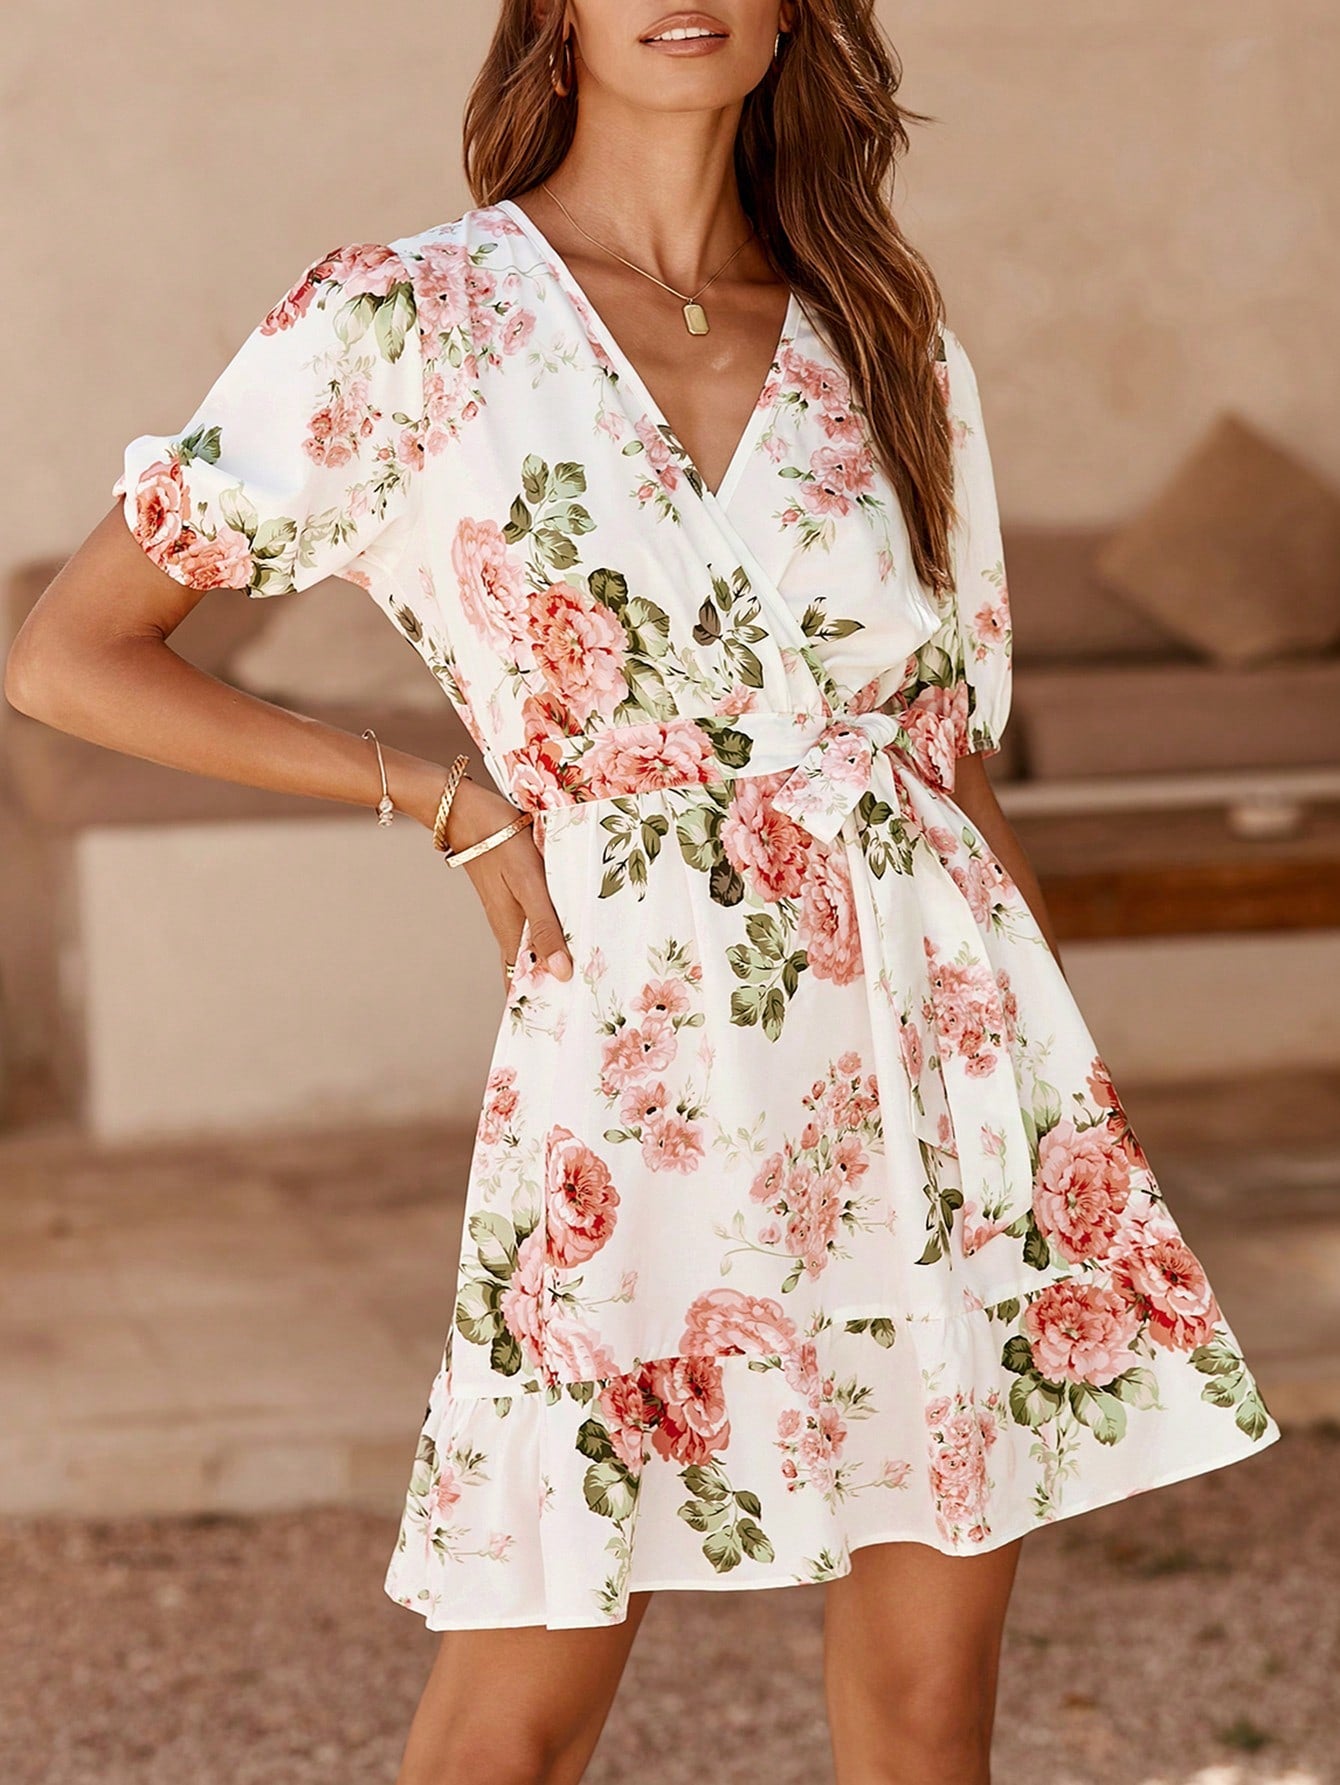 VCAY Women's Short Puff Sleeve Dress With Floral Print